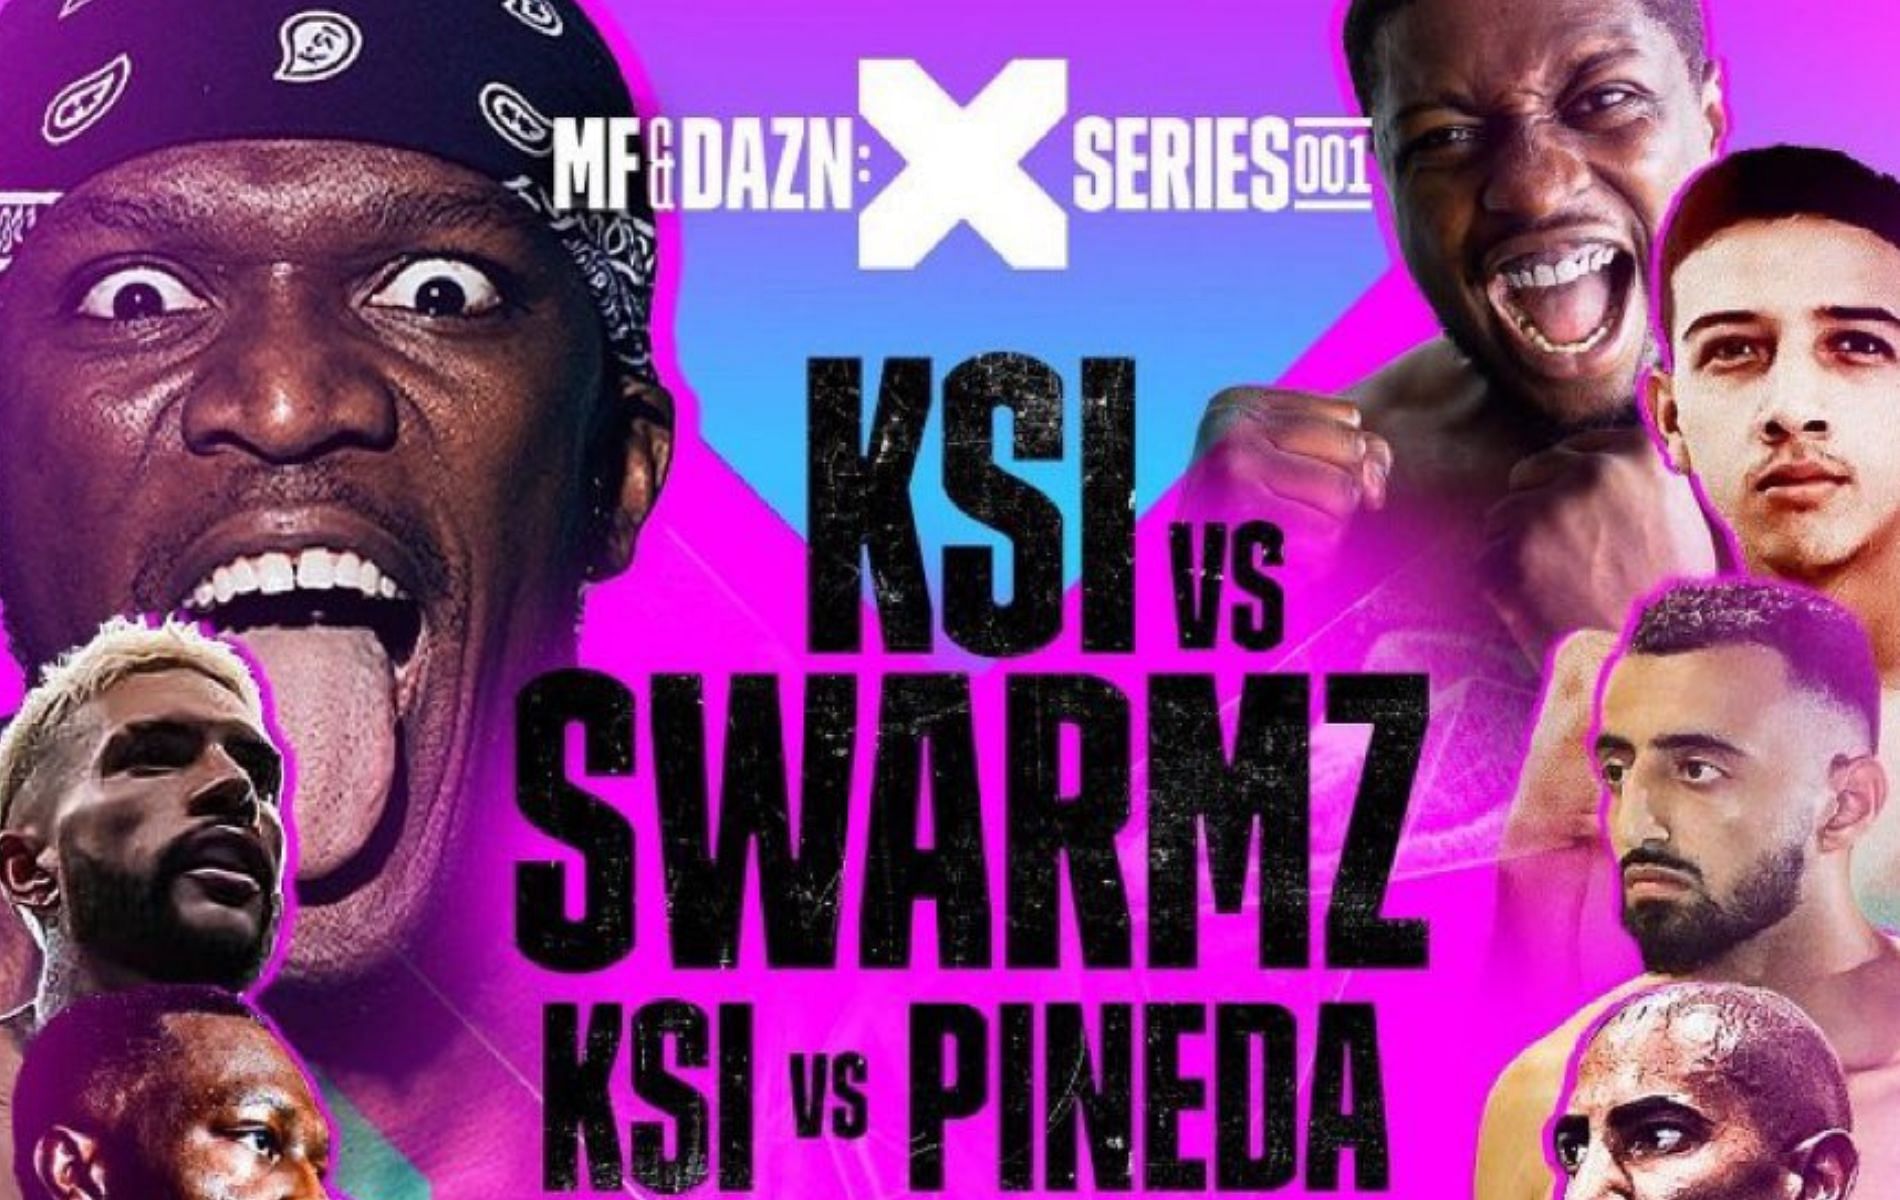 KSI vs Swarmz and KSI vs Pineda- Fight card, media workout, press conference and weigh in details